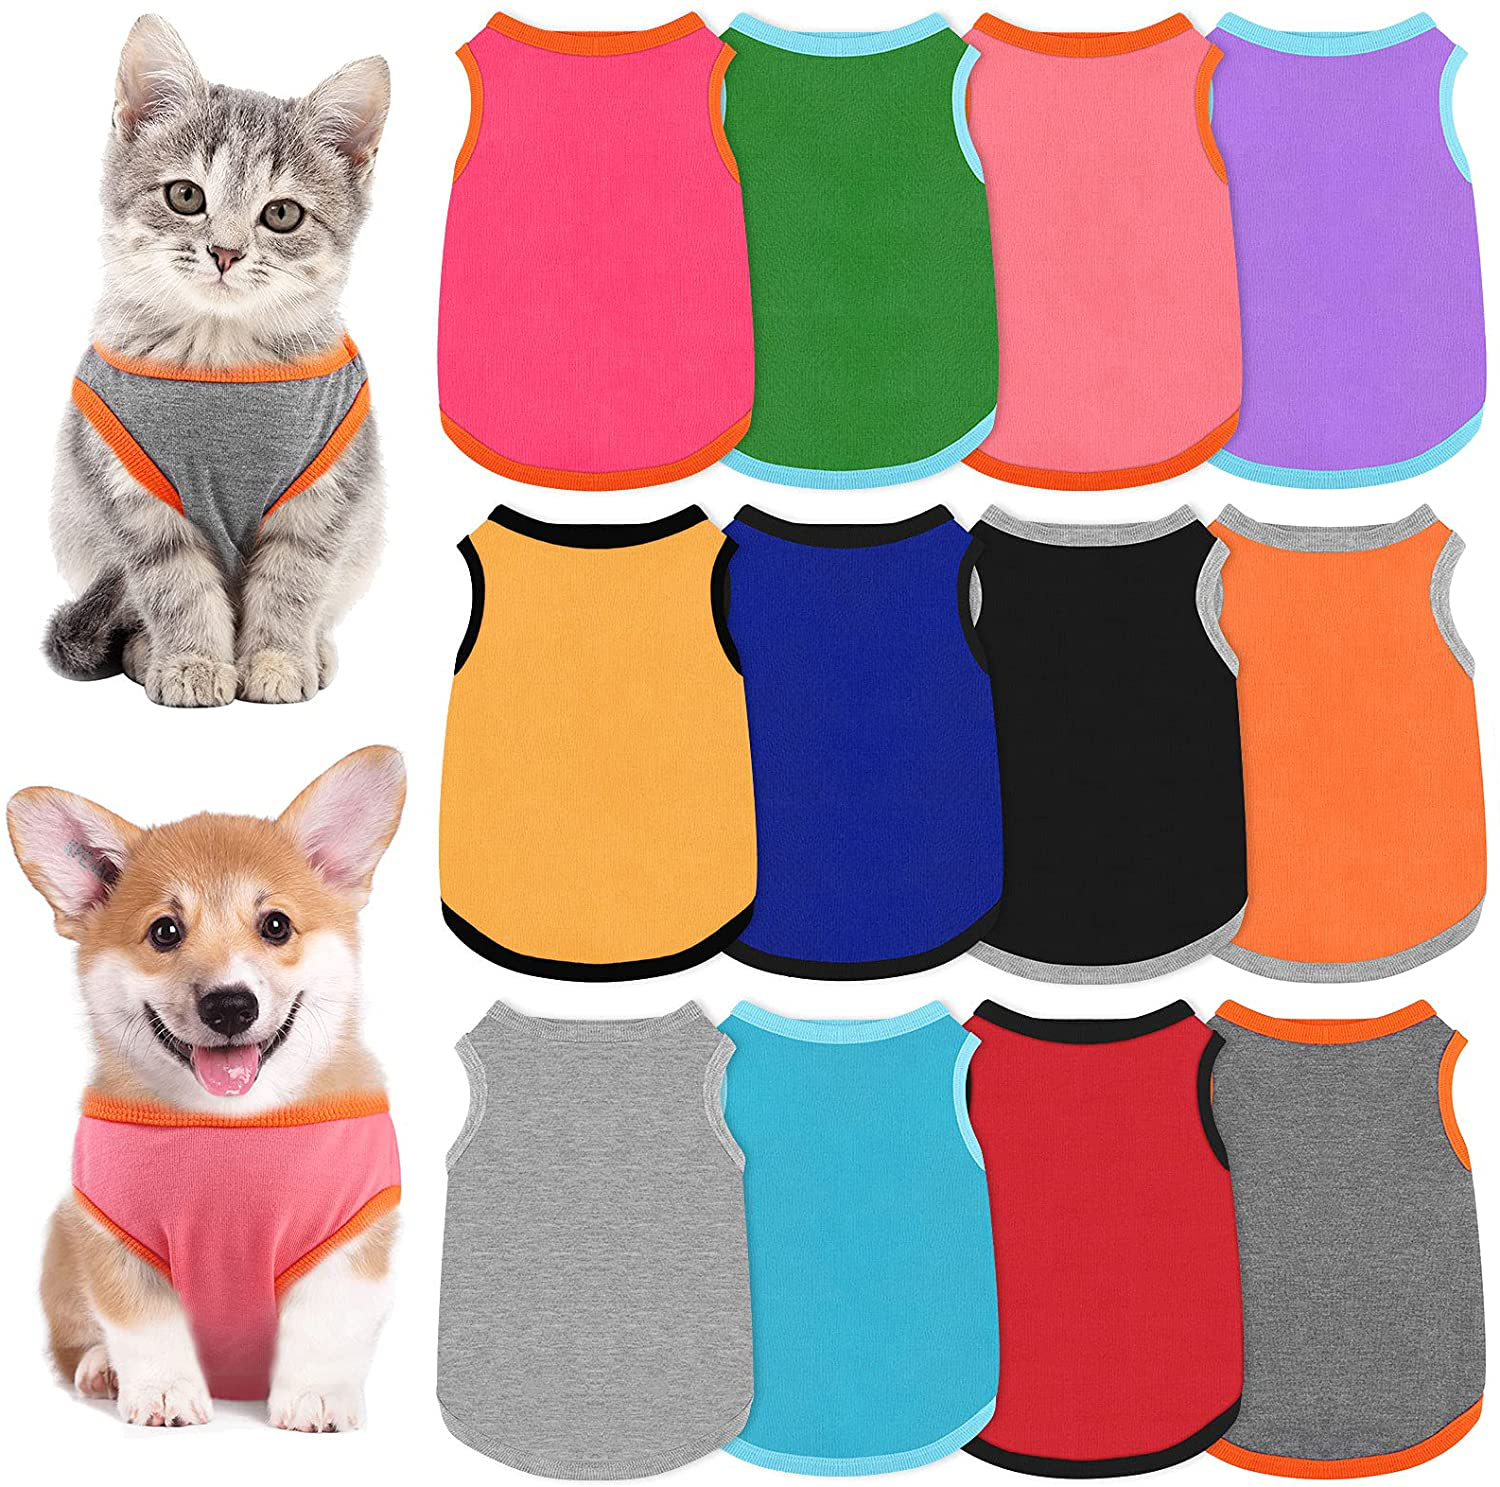 URATOT 12 Pieces Dog Shirts Pure Color Pet T Shirt Dog Outfit Soft and Breathable Pet Puppy Blank Clothes for Cats and Dogs, Size Medium